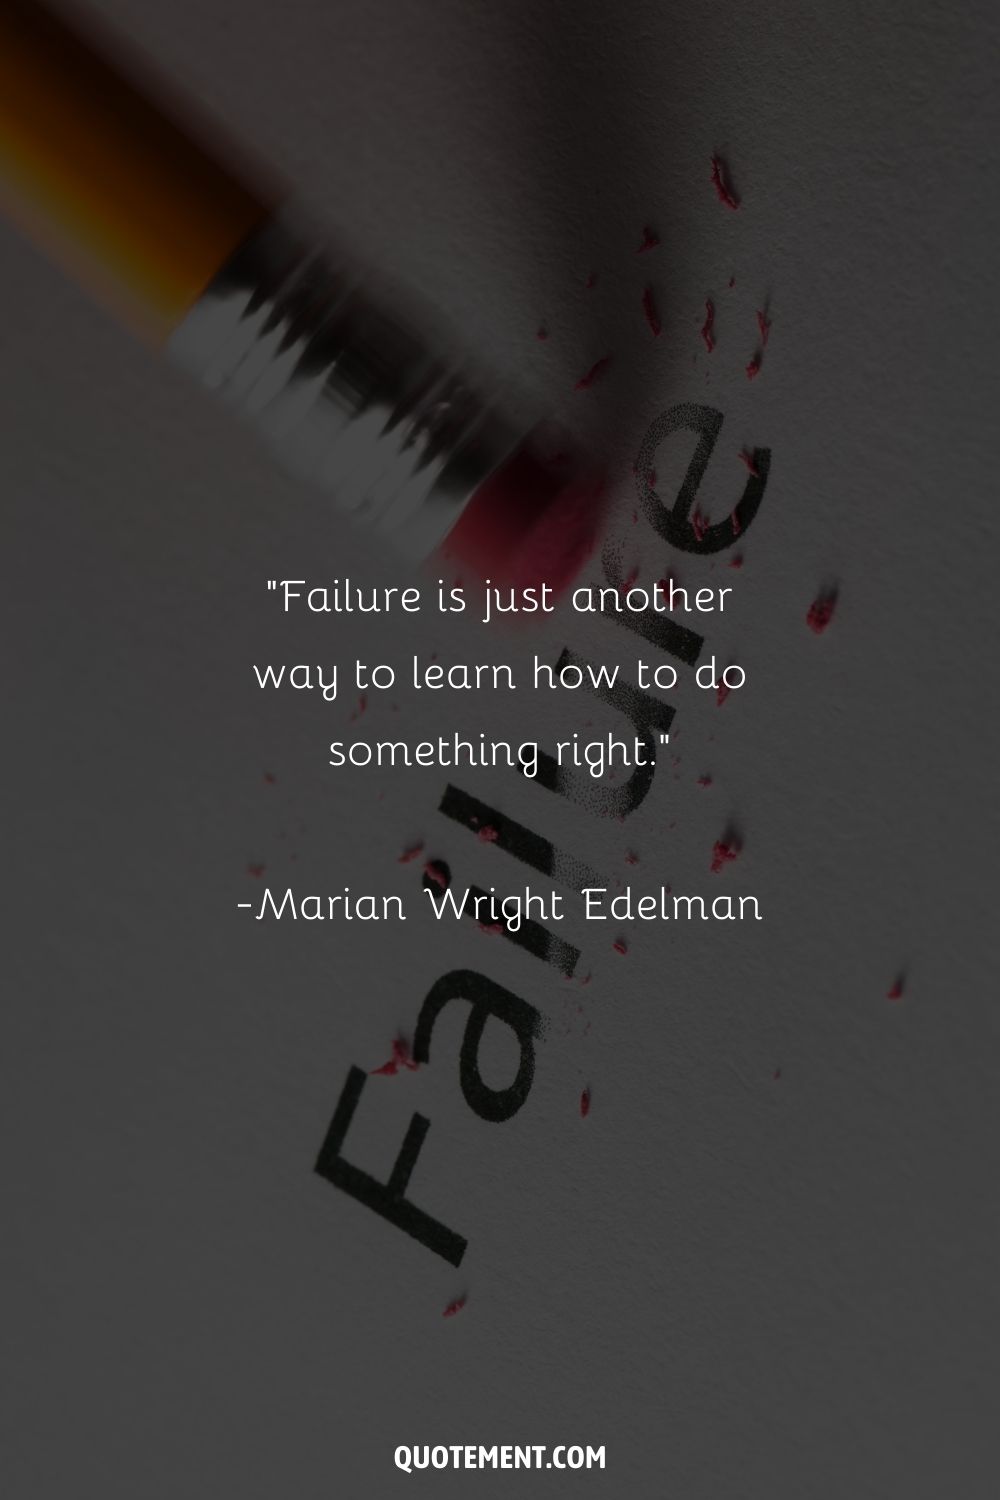 “Failure is just another way to learn how to do something right.” ― Marian Wright Edelman